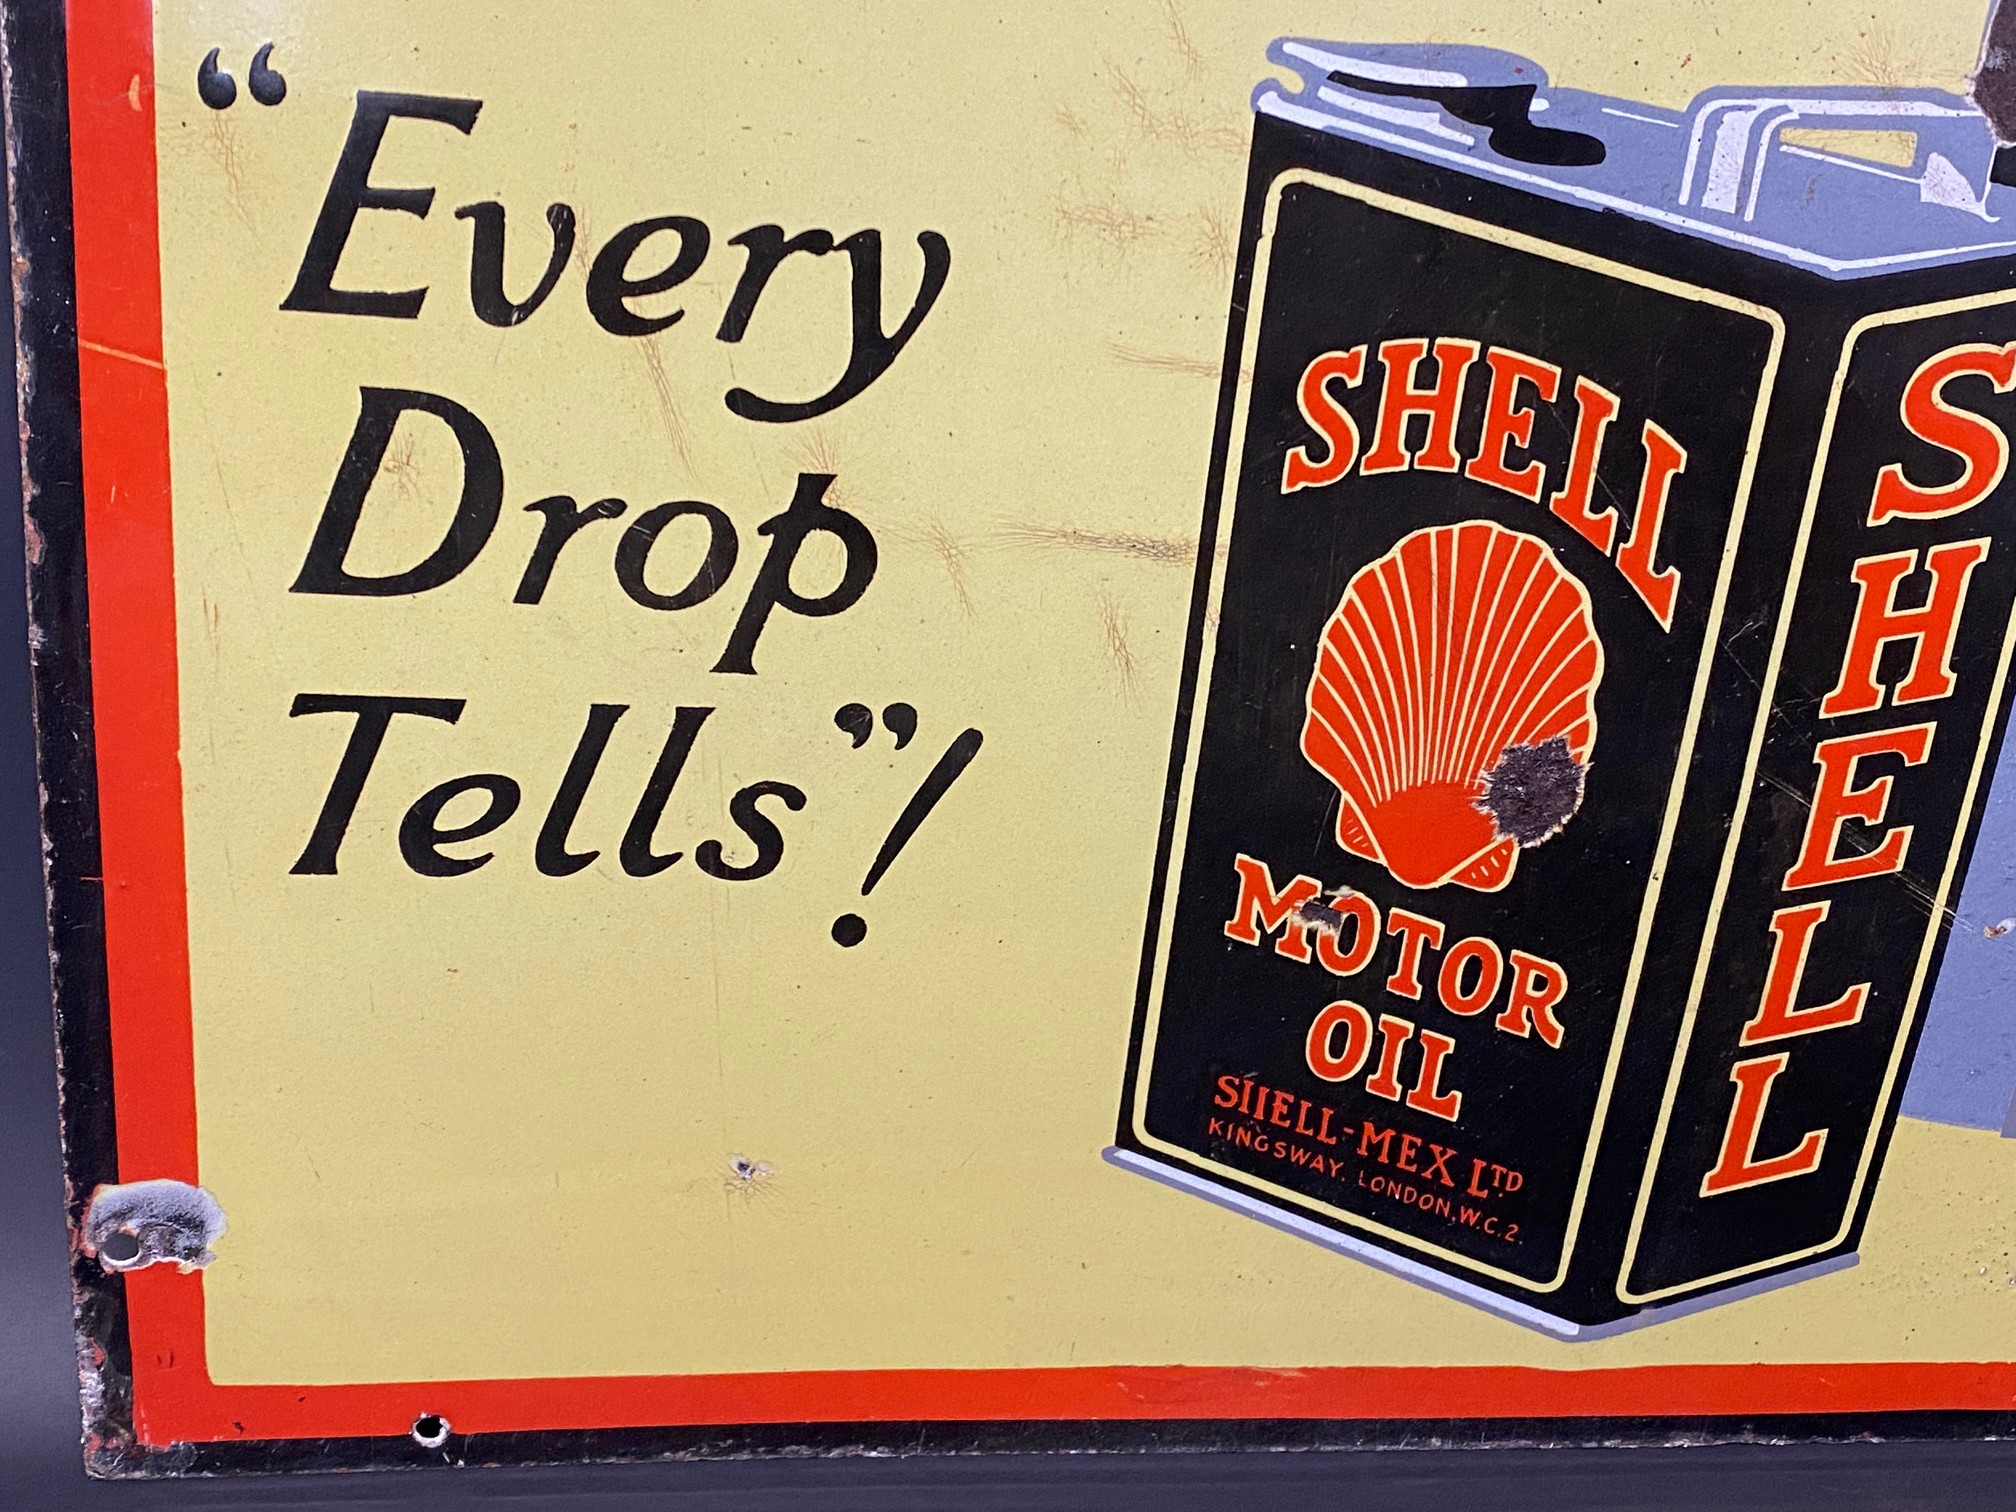 A Shell Lubricating Oils 'Every Drop Tells' pictorial enamel sign in very good condition, 24 x 36". - Image 5 of 7